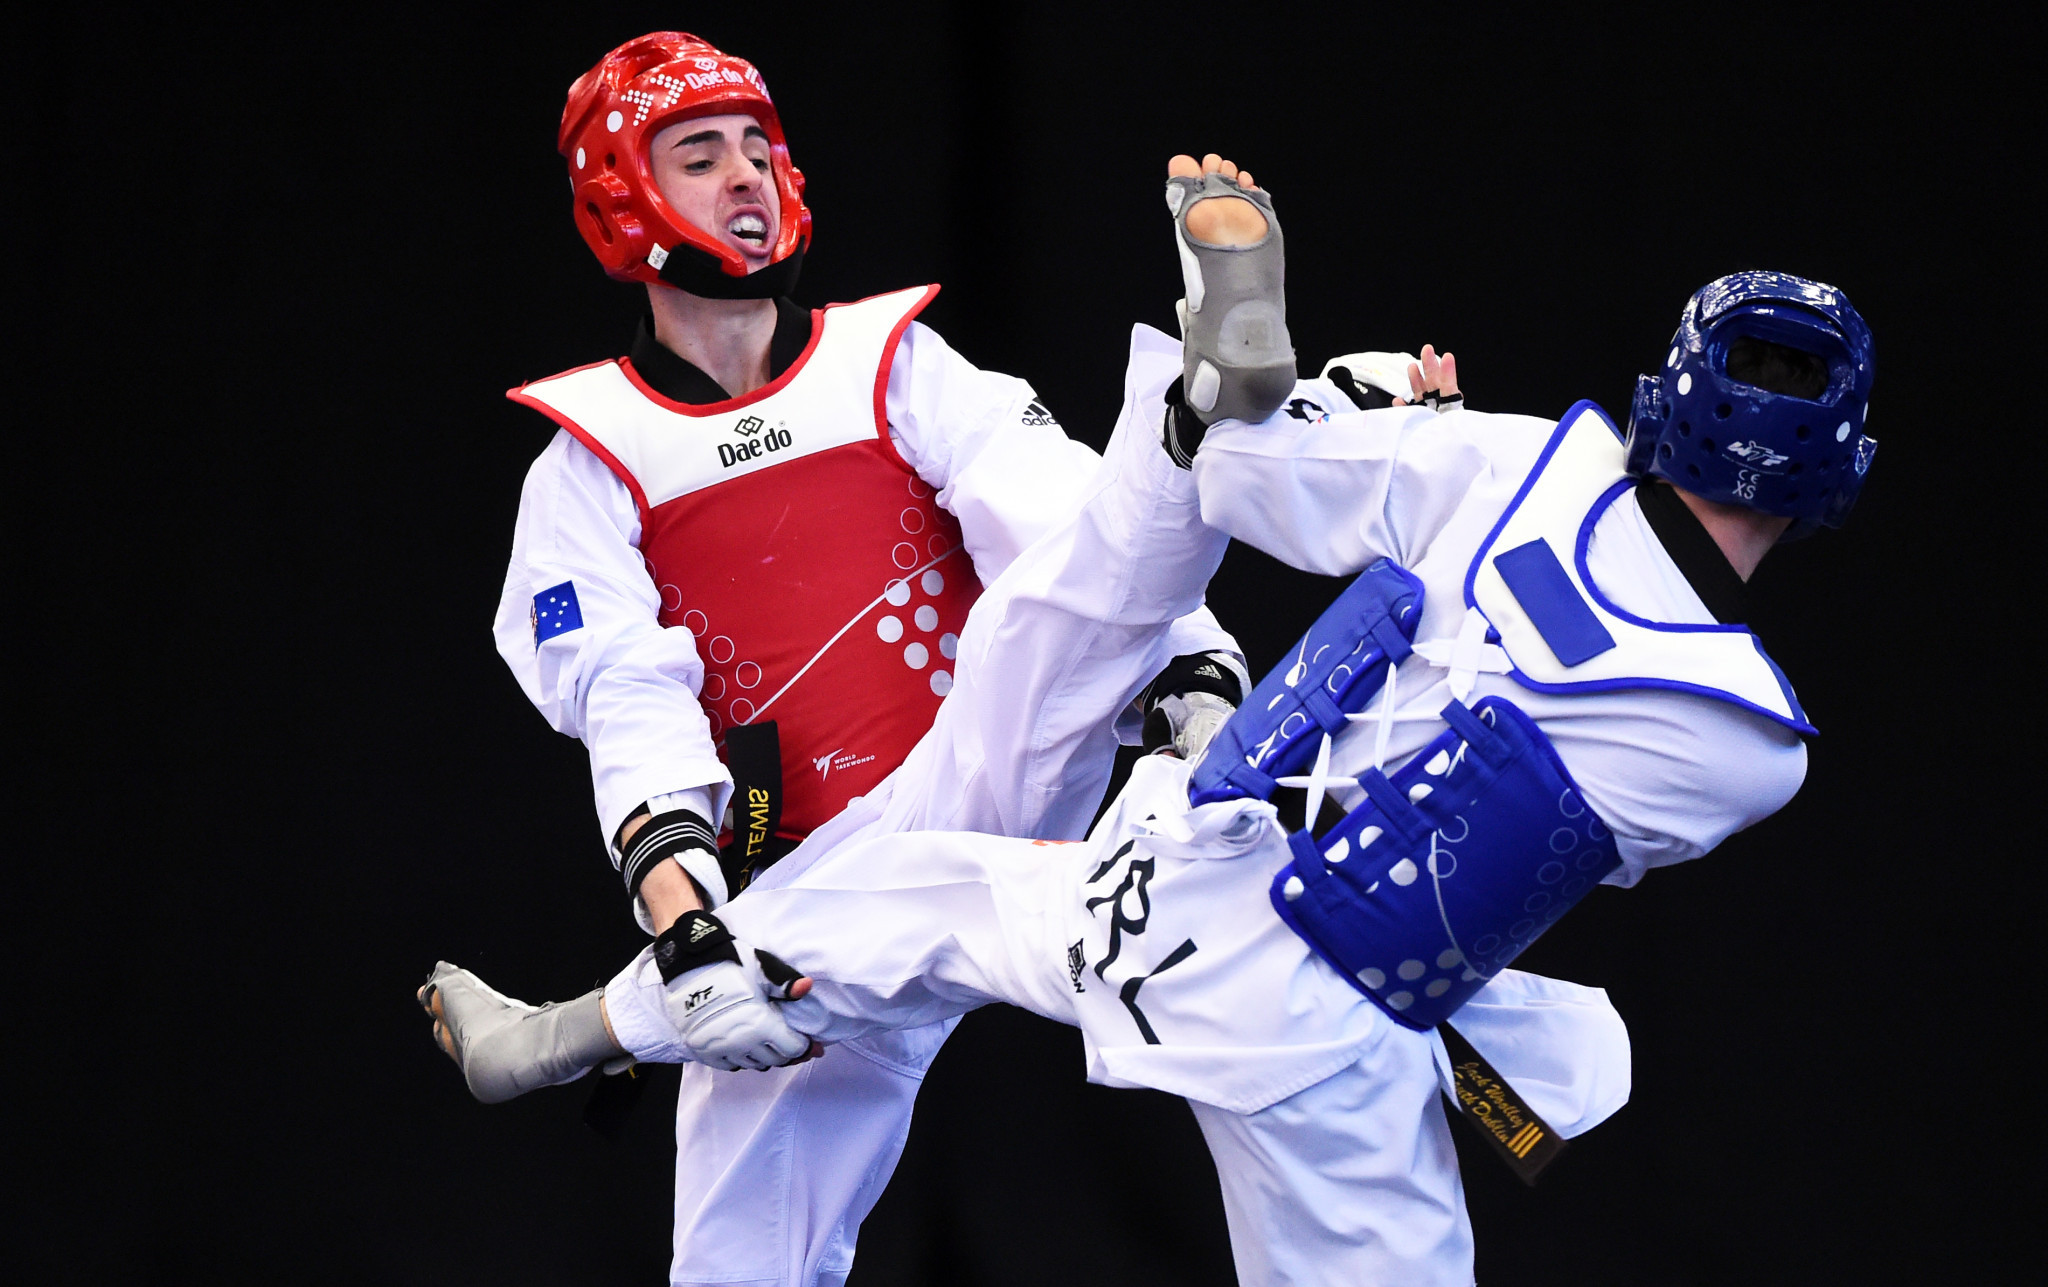 Australian taekwondo star Lewis receives boost from hosting Zoom sessions